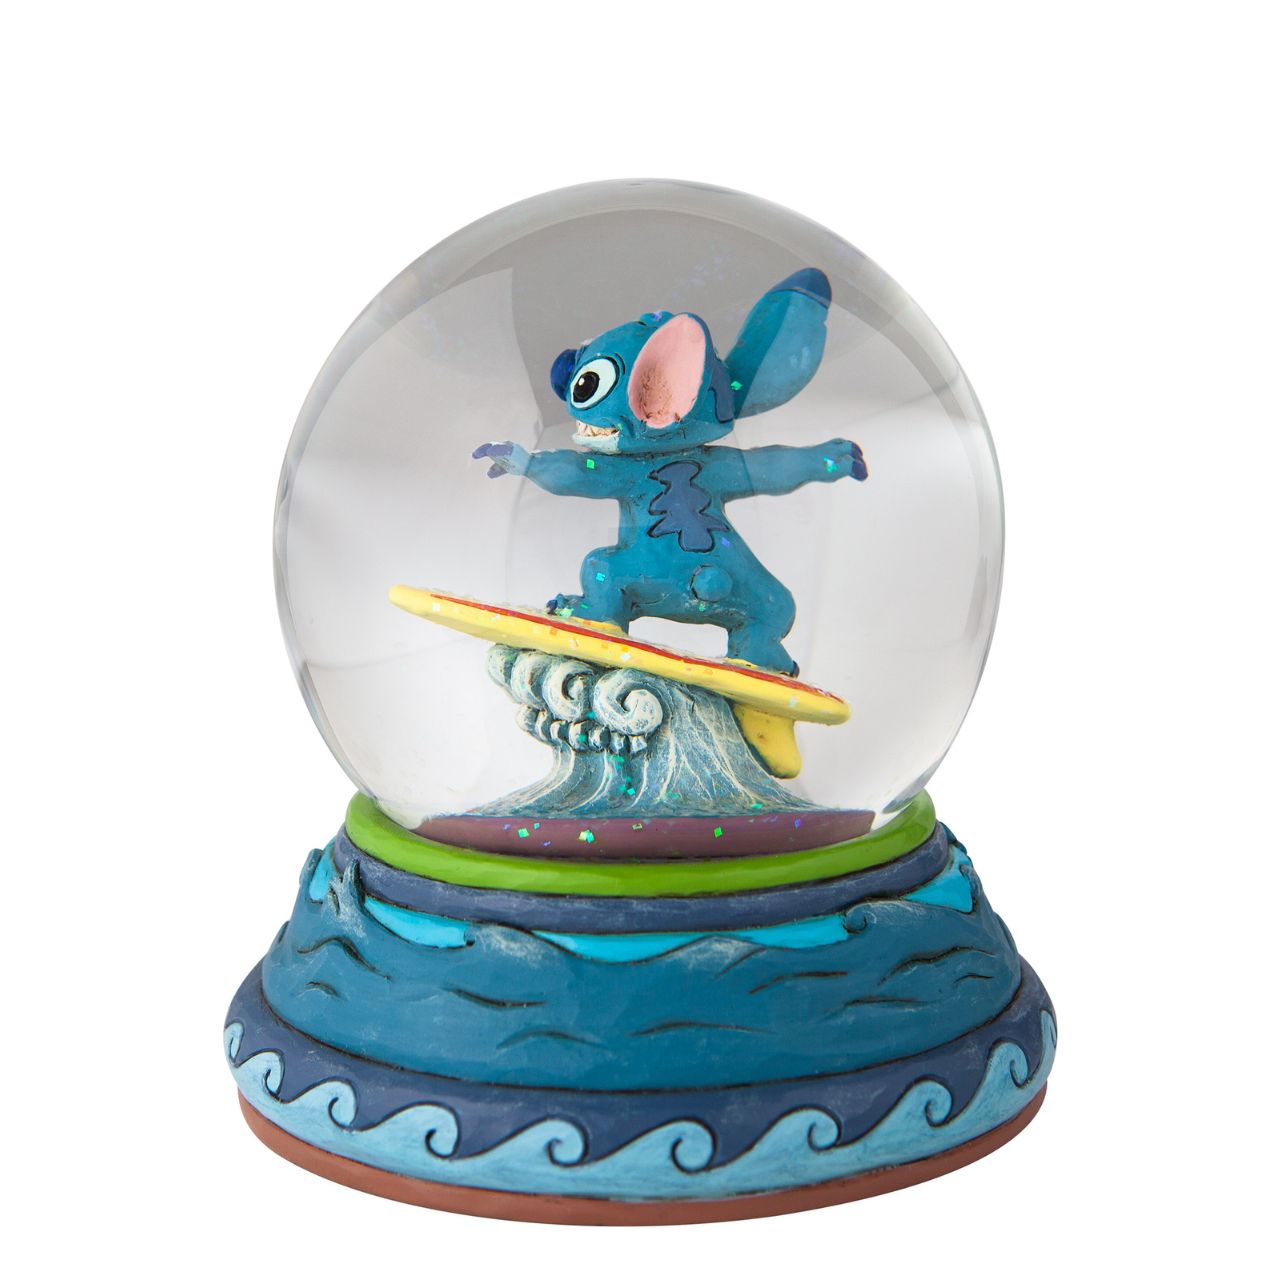 “Shootin’ the Curls” Stitch Snow Globe by Jim Shore  Stitch catches a wave inside your waterball! The Hawaiian adopted alien has learned a few things in his time on earth, among them playing the guitar and hanging ten. With striking form and colour, this Jim Shore design applauds the Disney film.